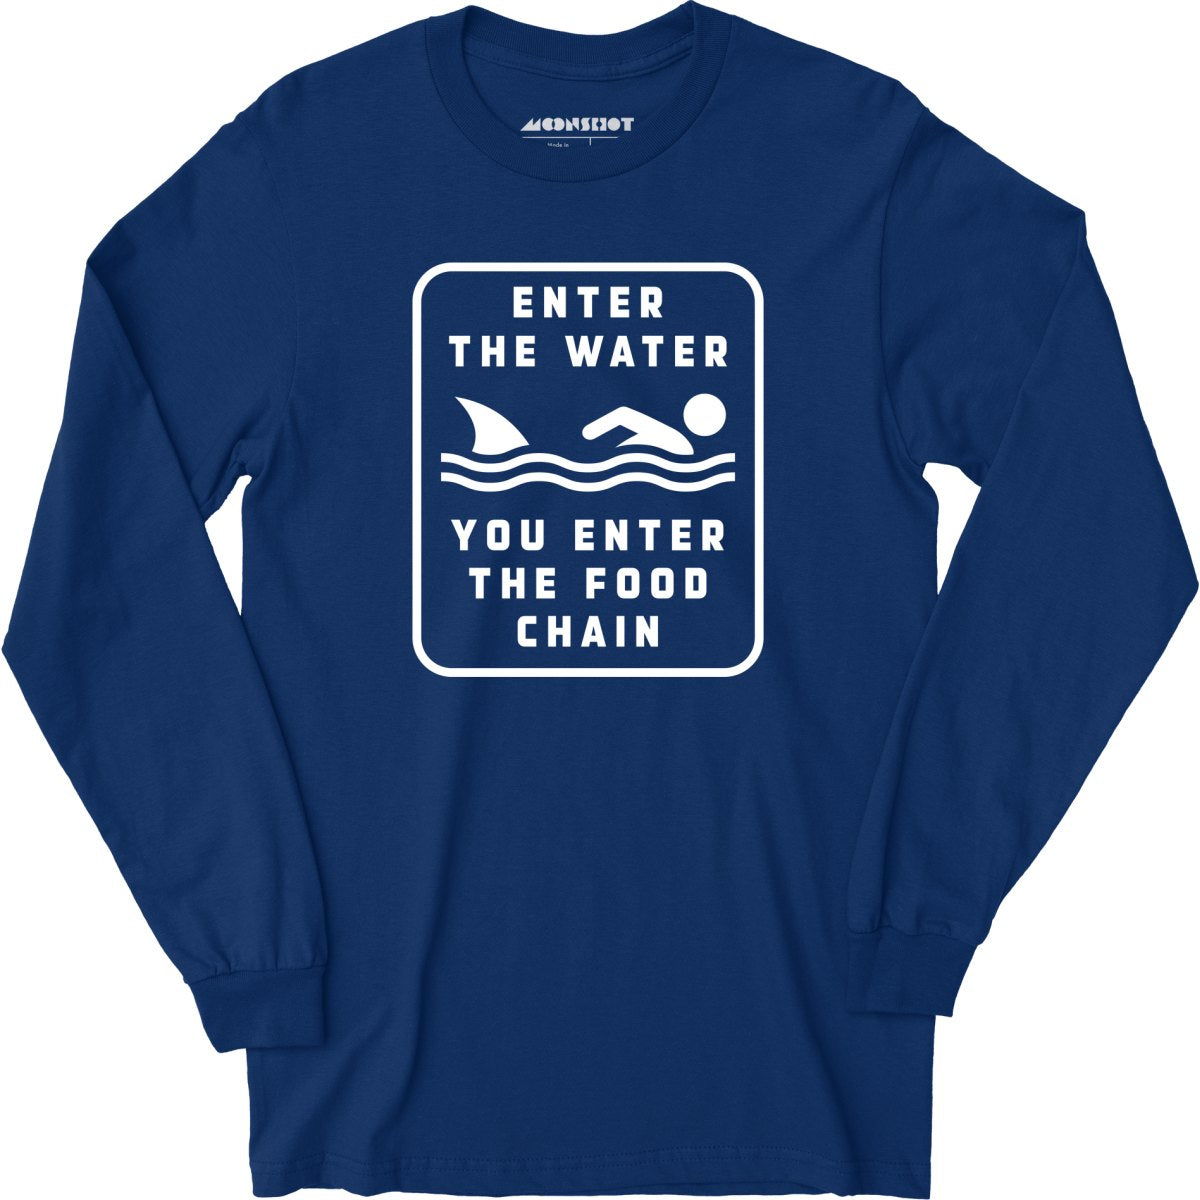 Enter the Water You Enter the Food Chain - Long Sleeve T-Shirt